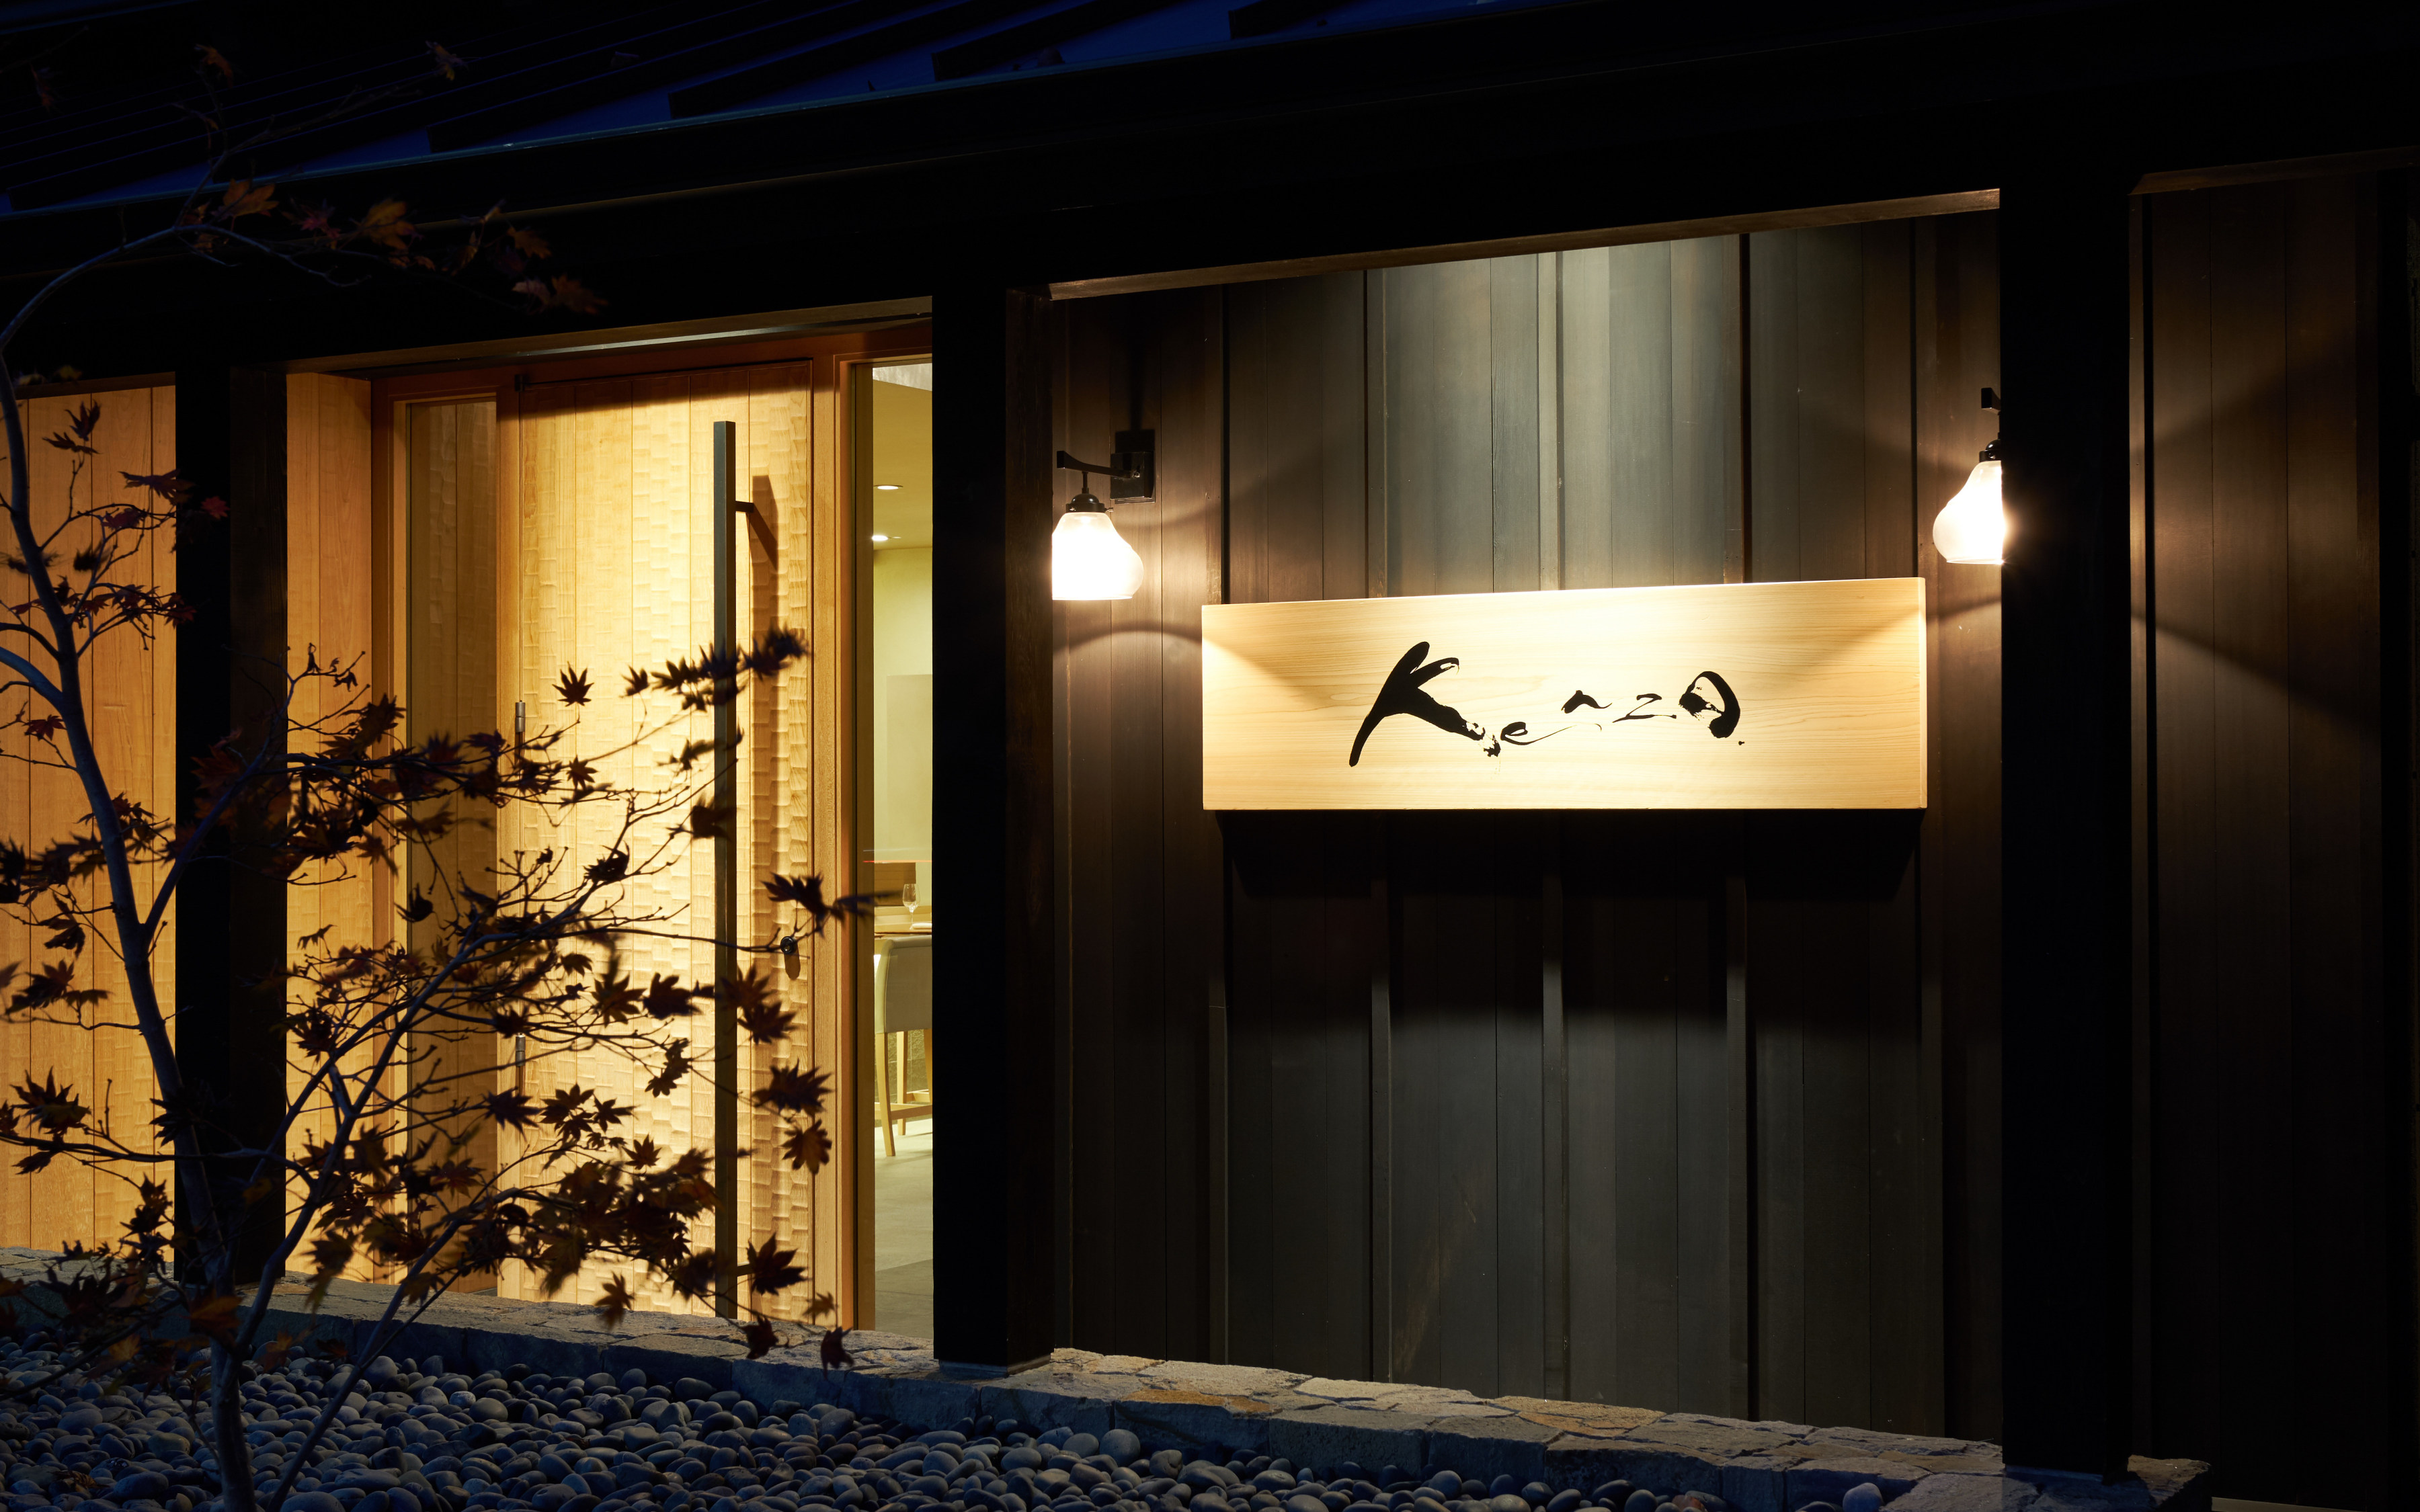 Kenzo Authentic Japanese Kaiseki Dining in Napa Valley